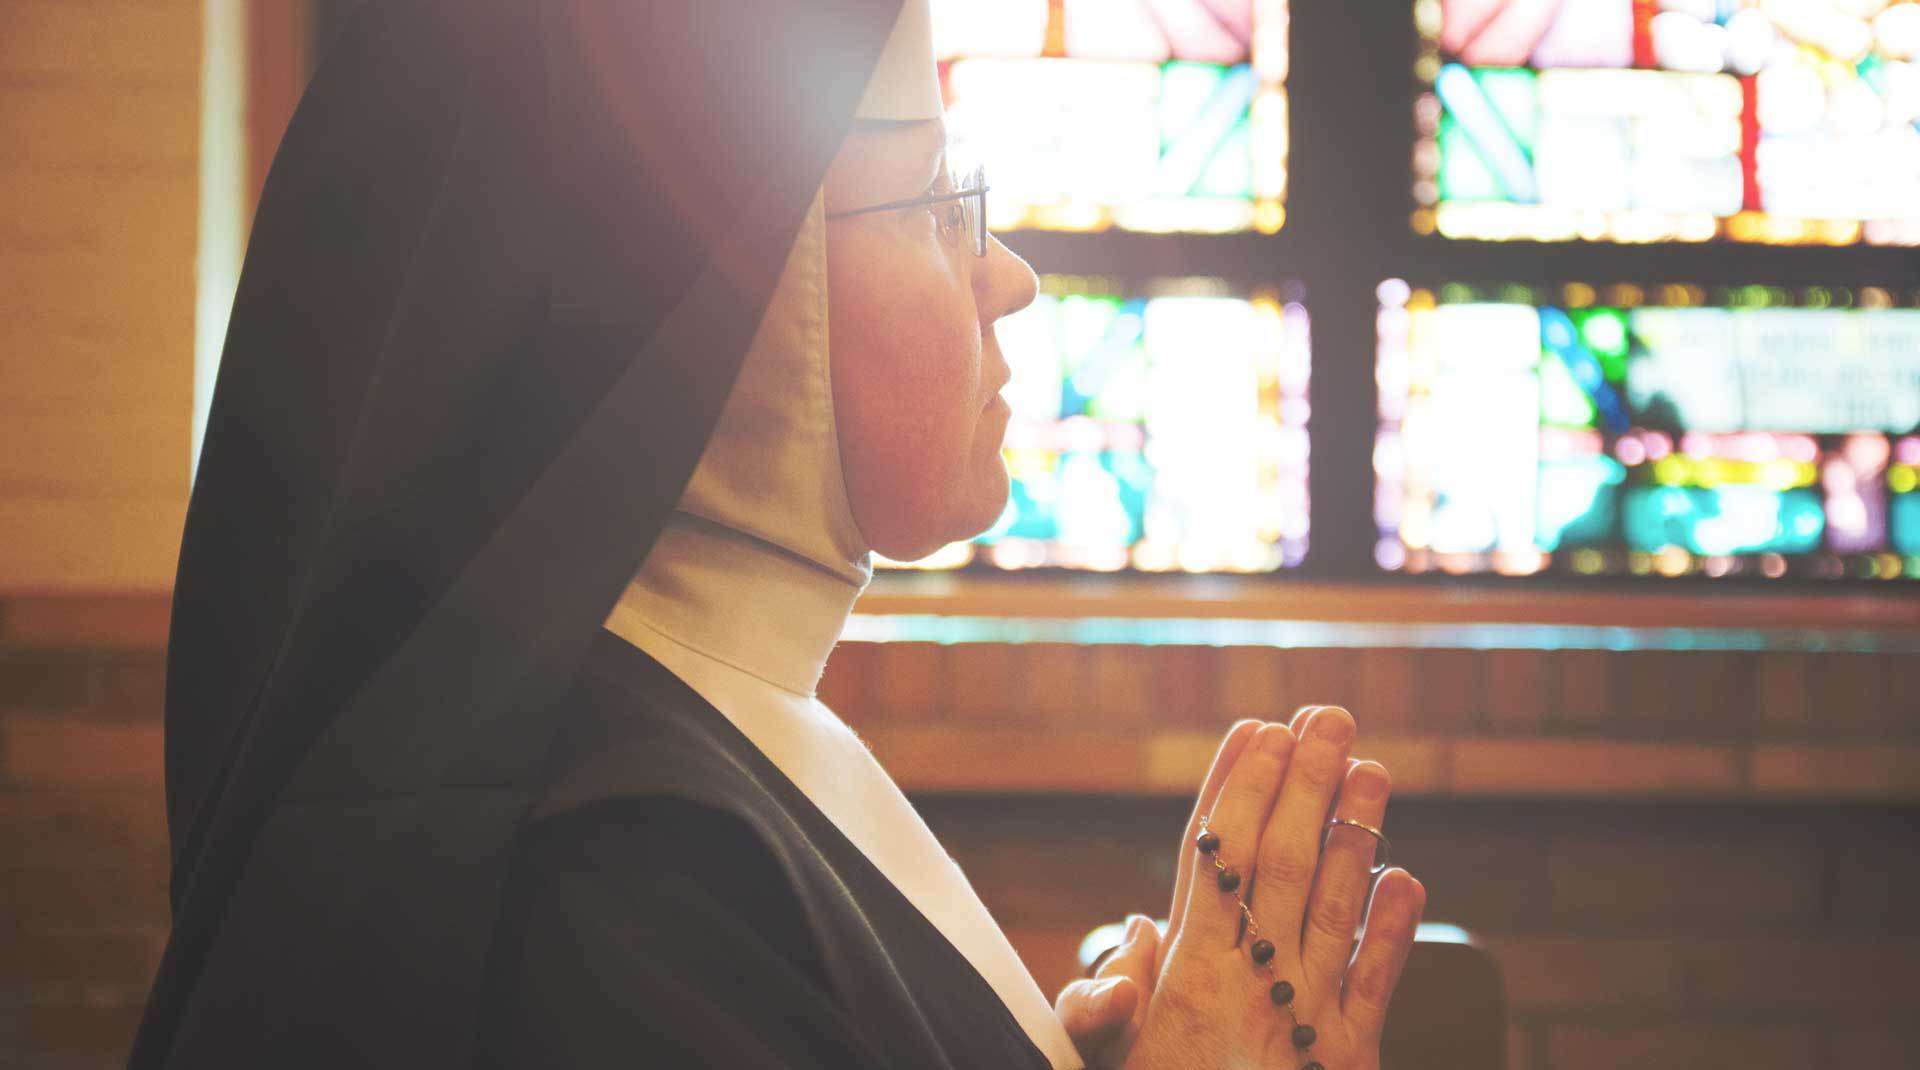 Sister praying in chapel holding rosary